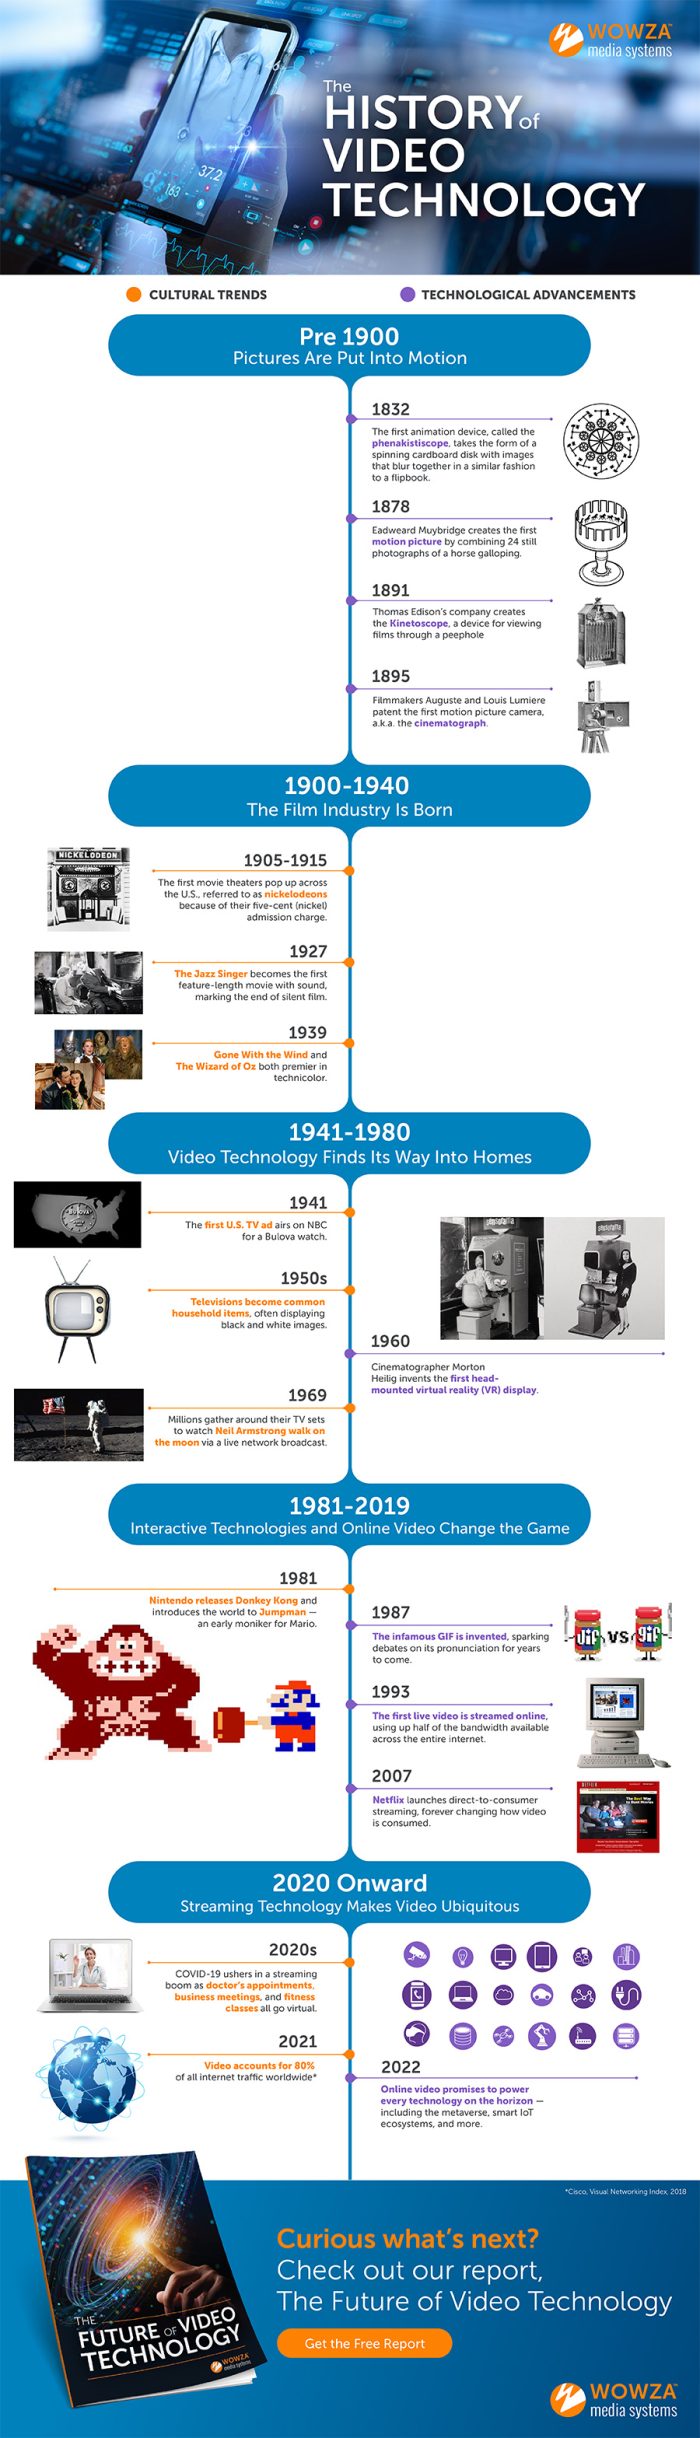 A timeline spanning pre 1900 through 2022 detailing the biggest developments in video technology.